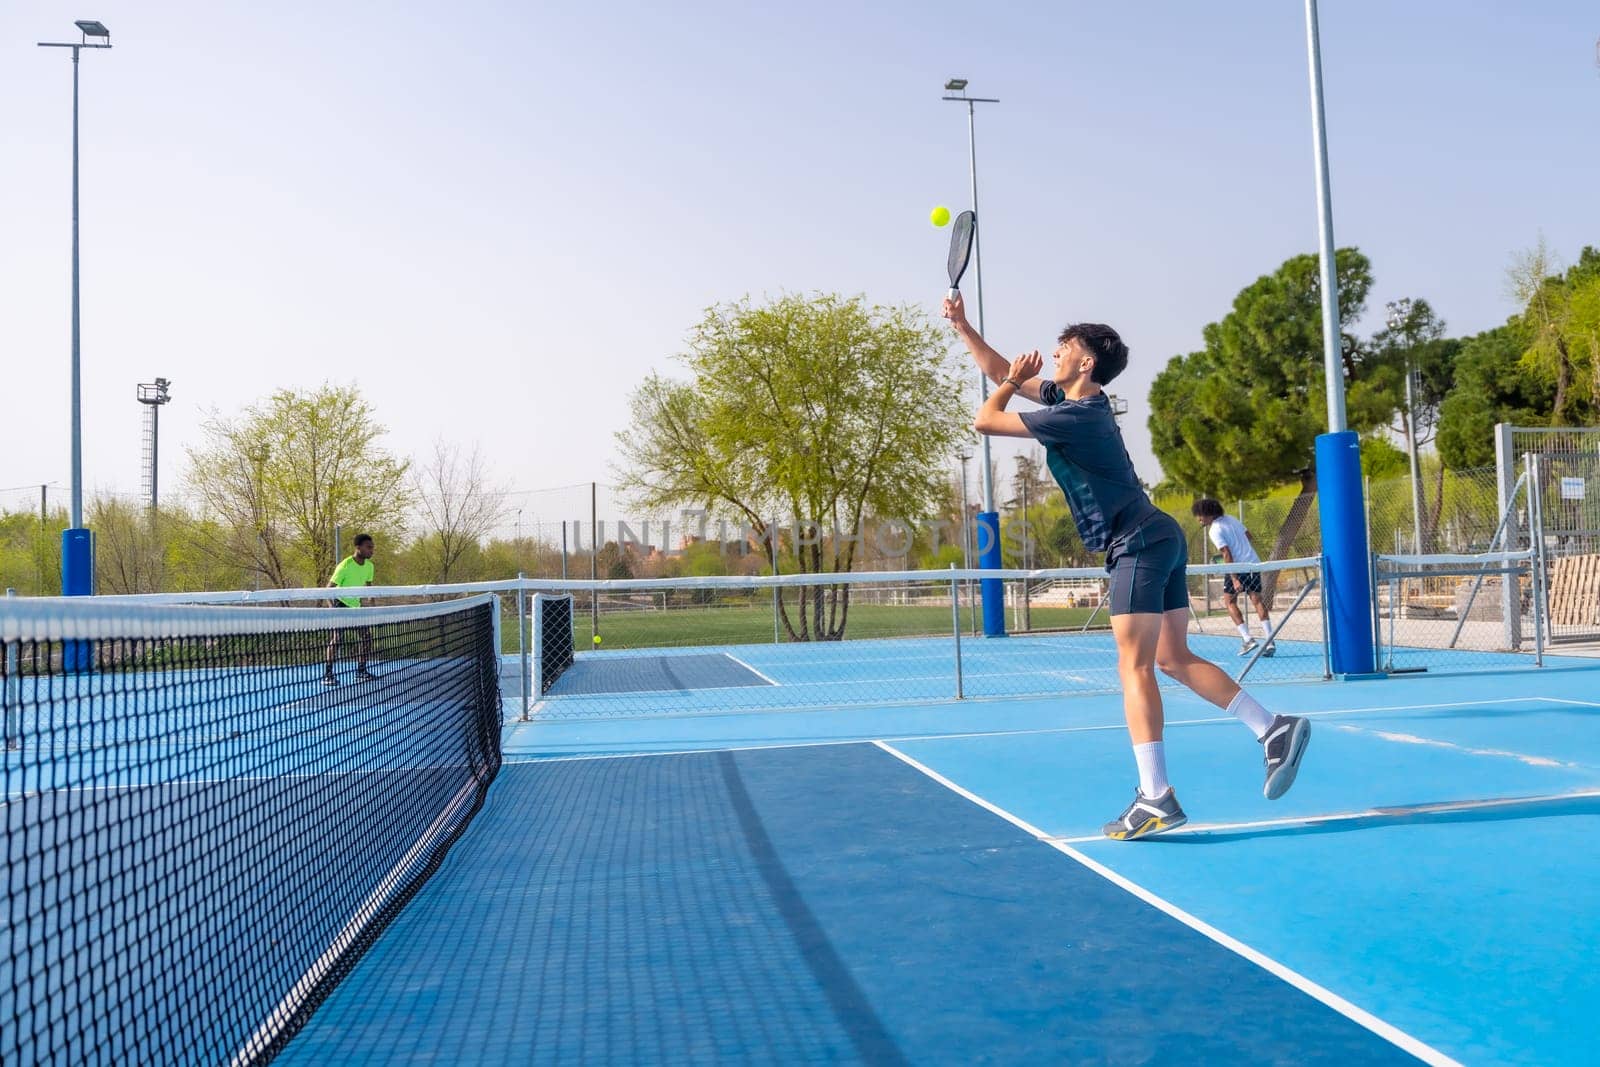 Man jumping while playing pickleball in an outdoor facility by Huizi